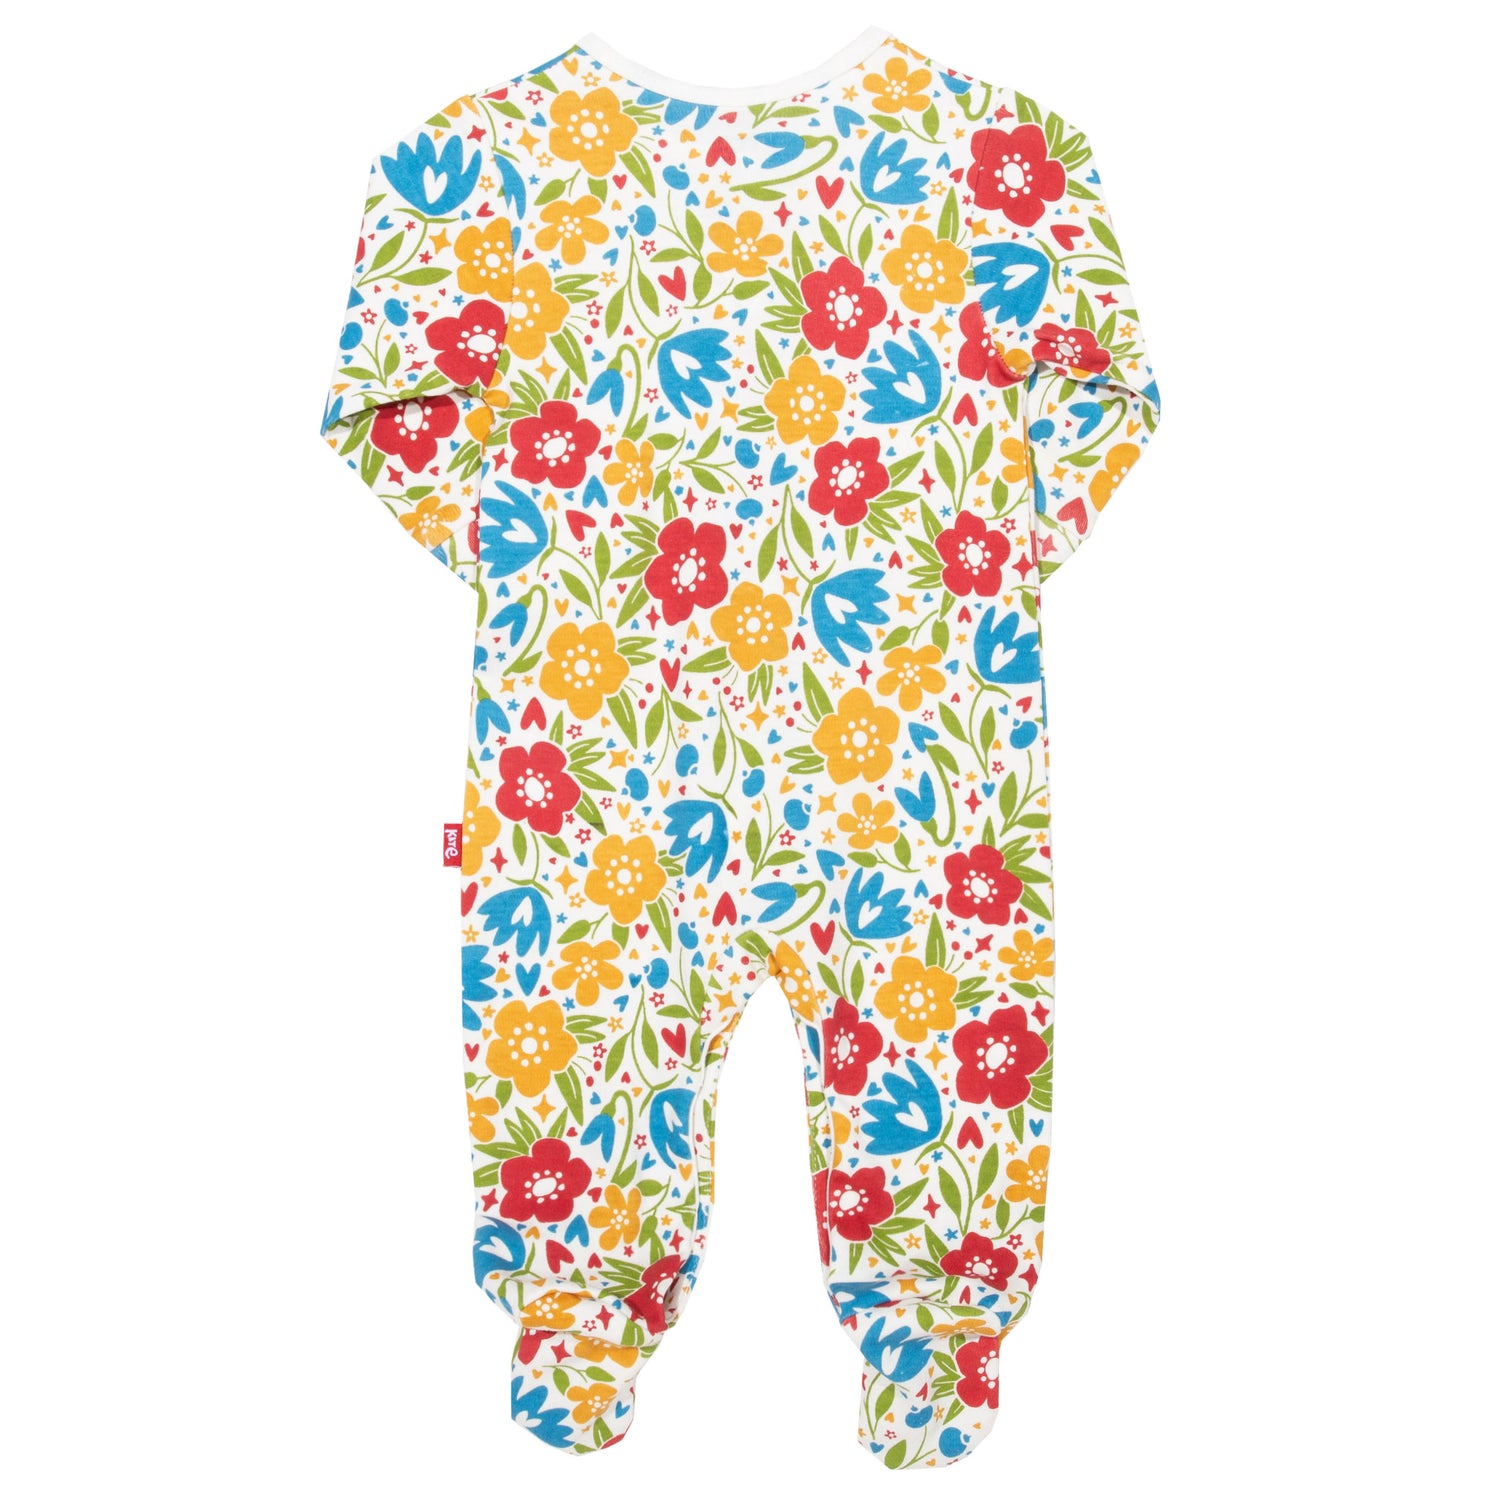 Winter floral baby sleepsuit - back